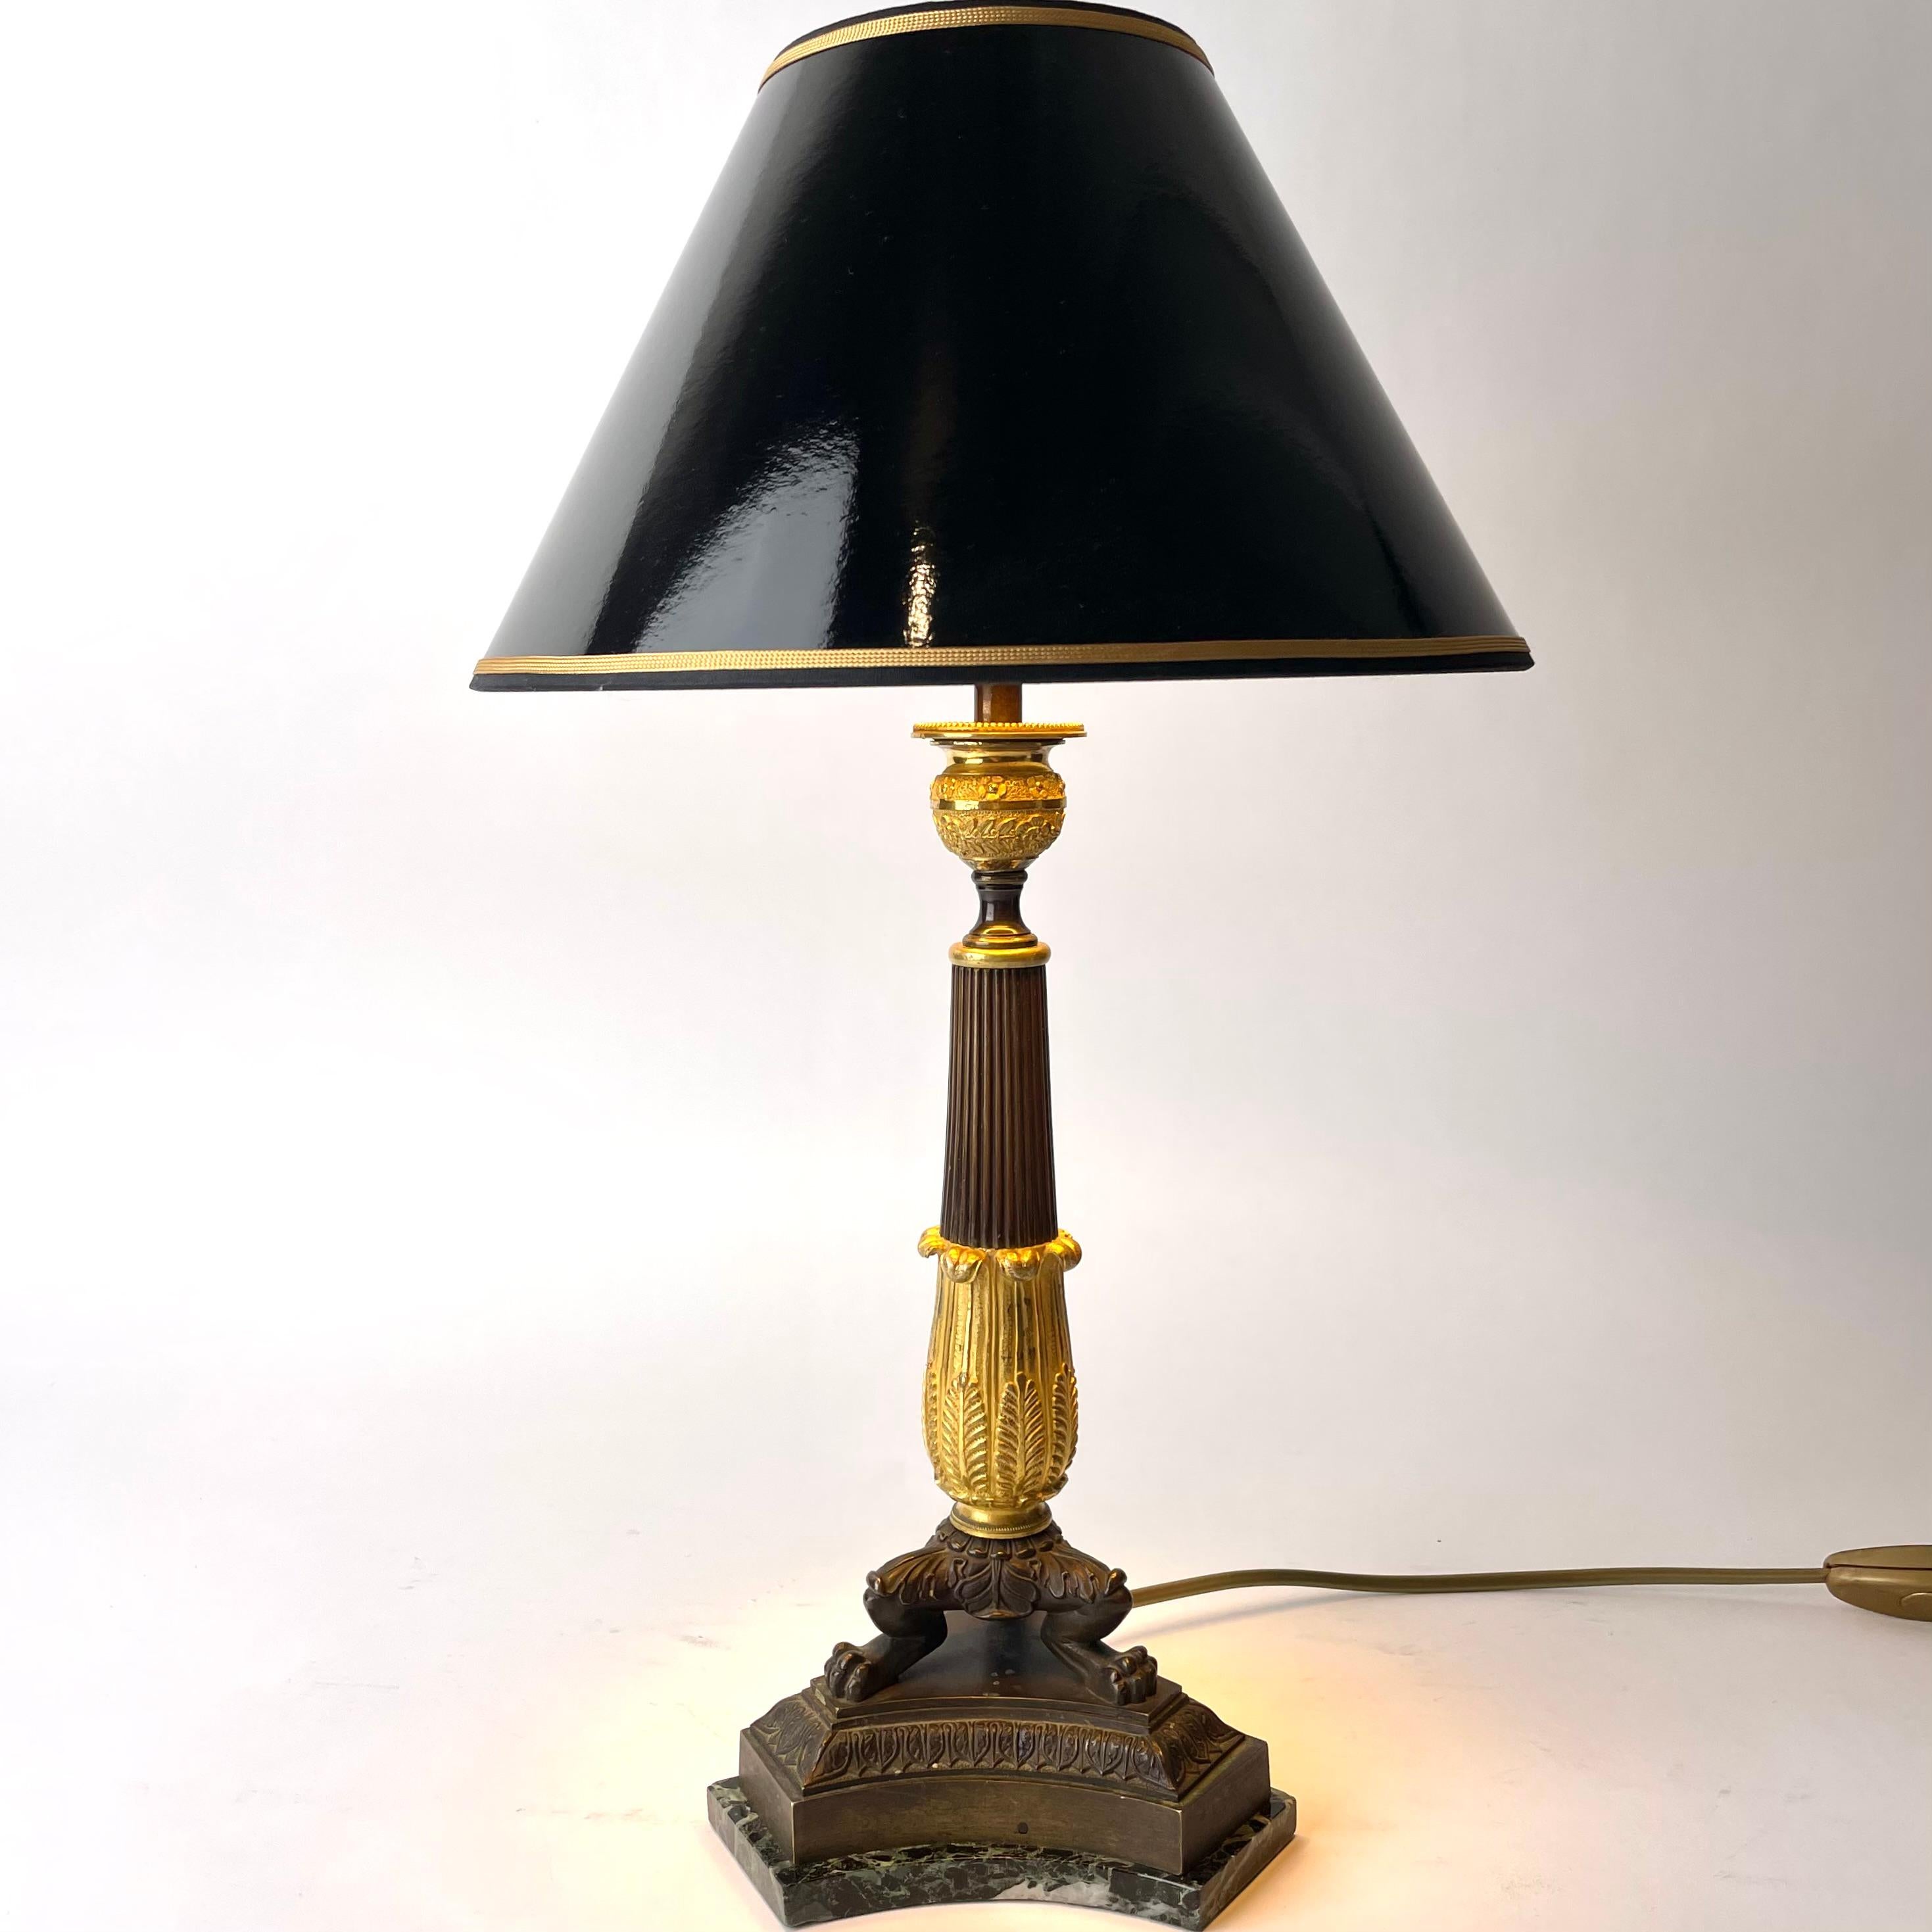 Elegant Table Lamp in gilded and dark patinated bronze with a marble base. Empire, made during the 1820s. Originally a empire candlestick converted to a table lamp in the early 20th Century.

Newly rewired electricity 

New lampshades in black